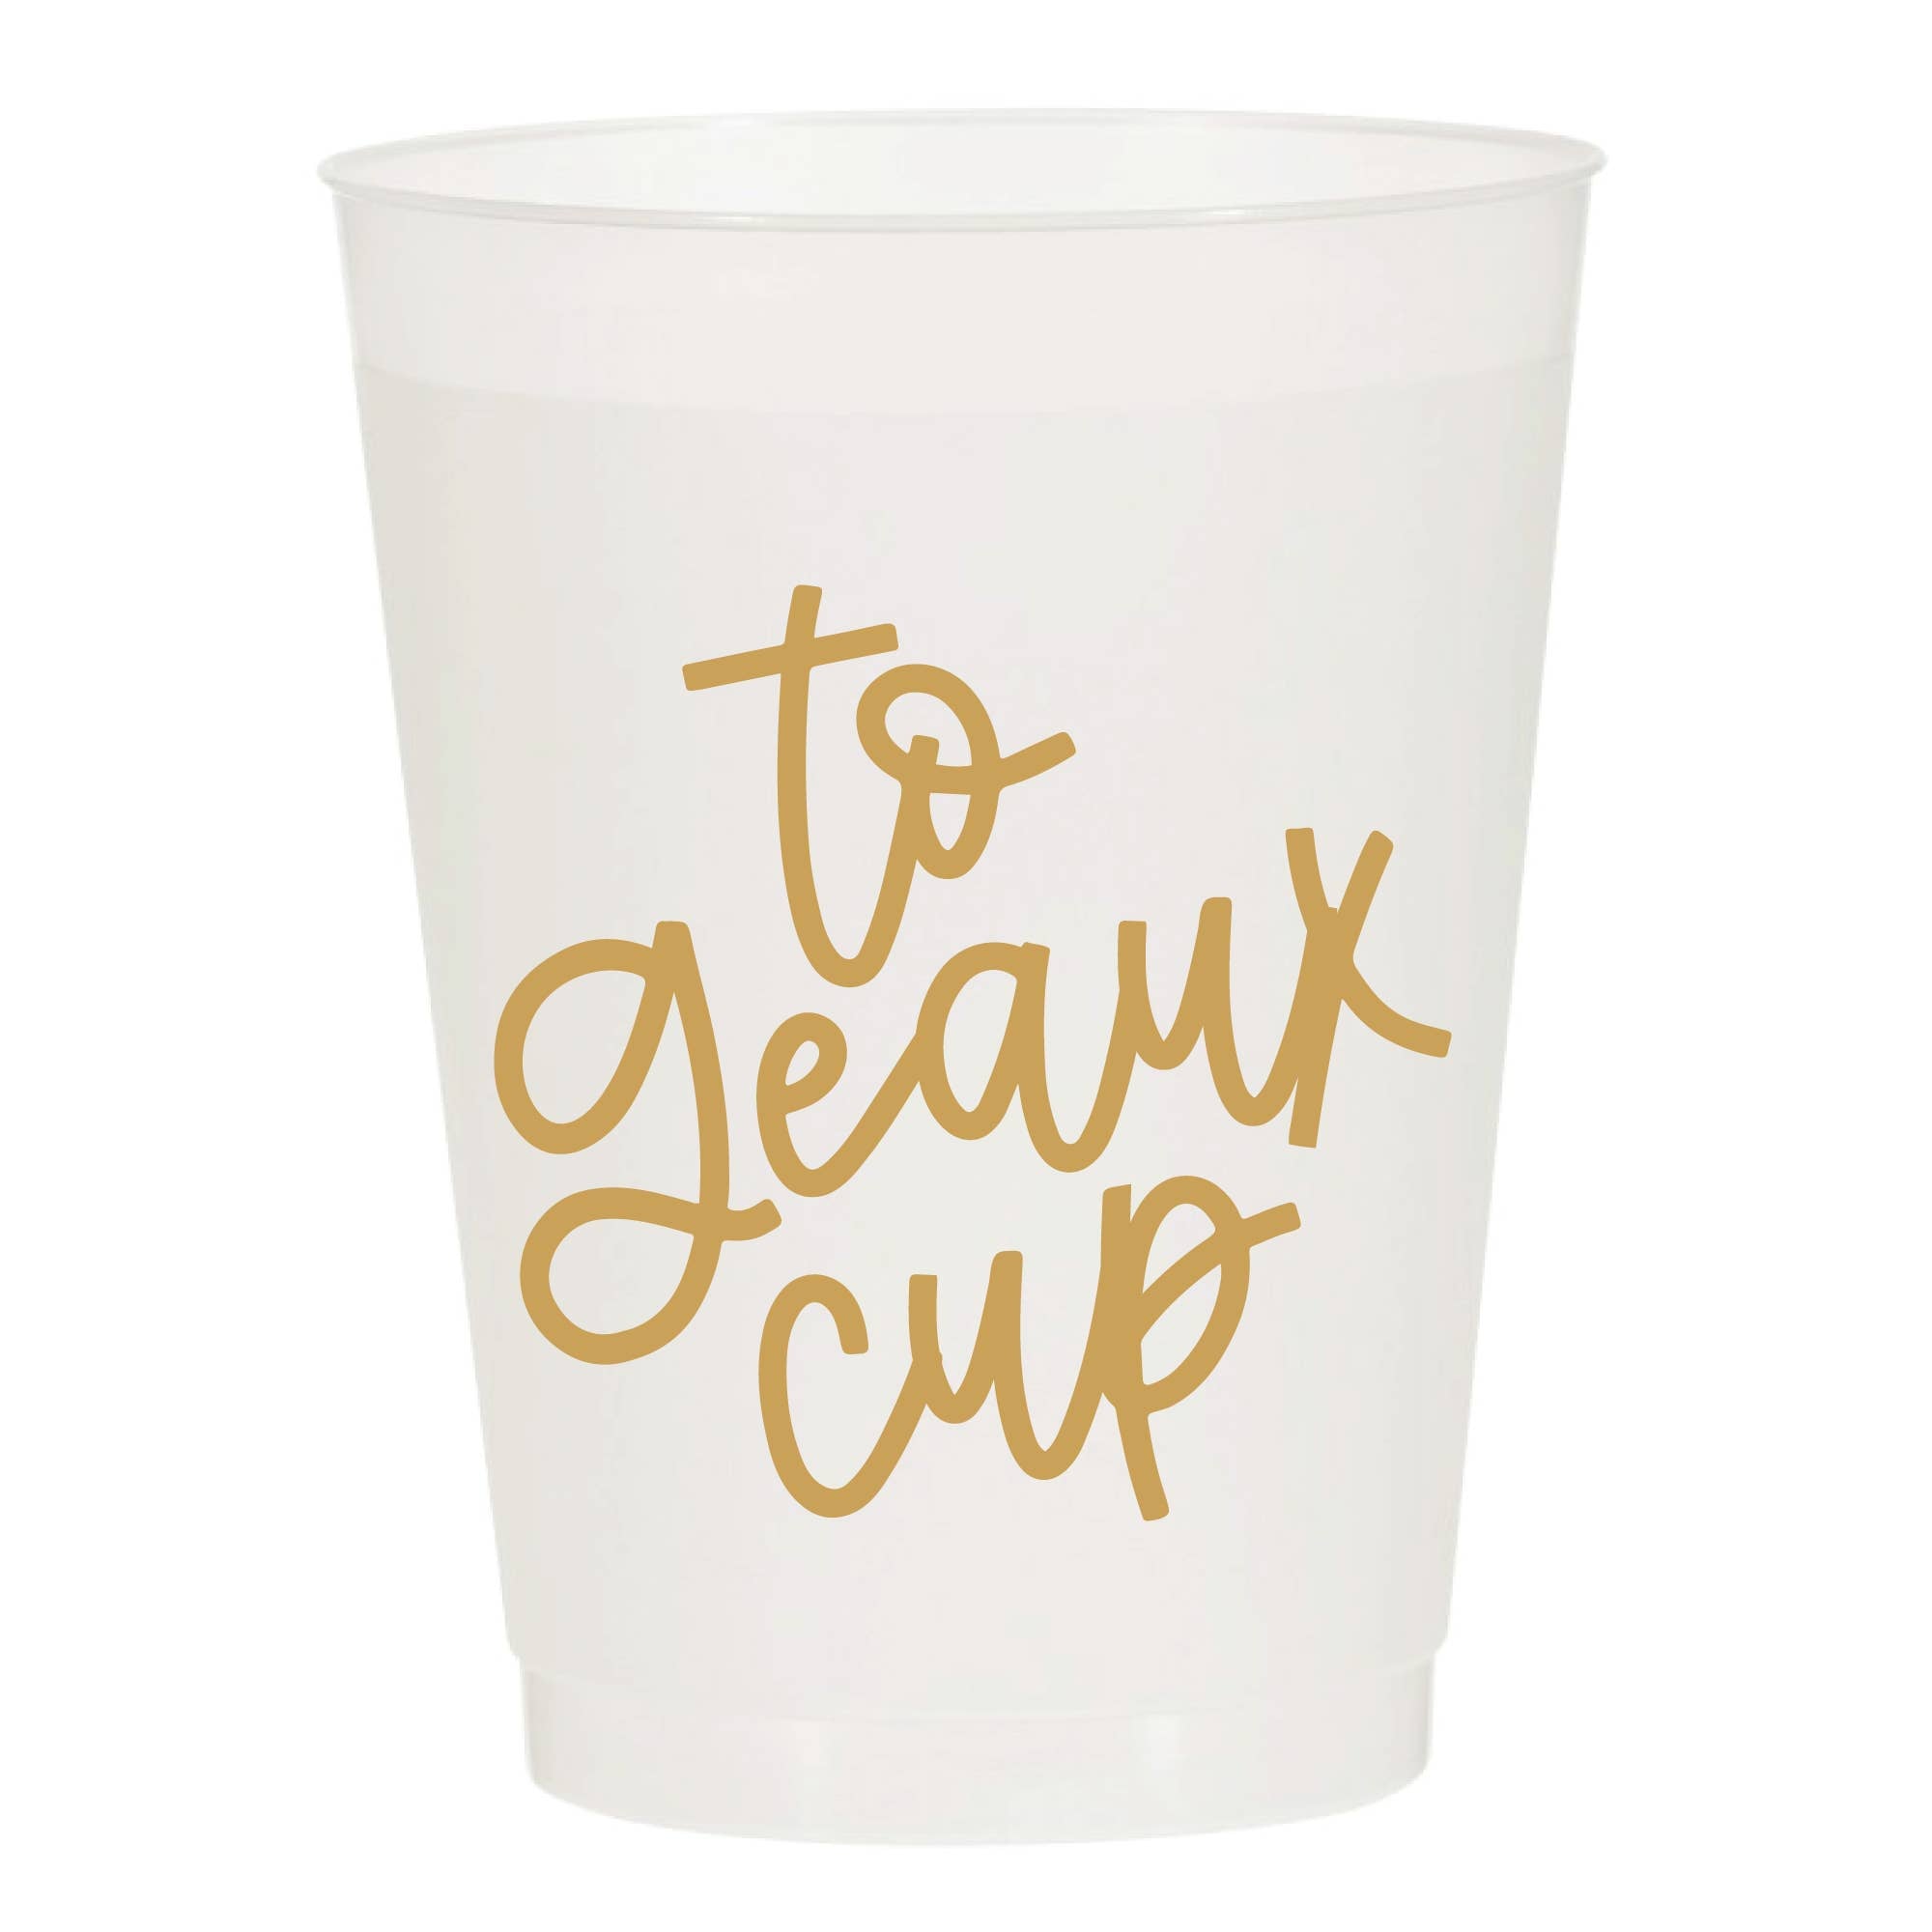 To Geaux Cups (6 Pk)